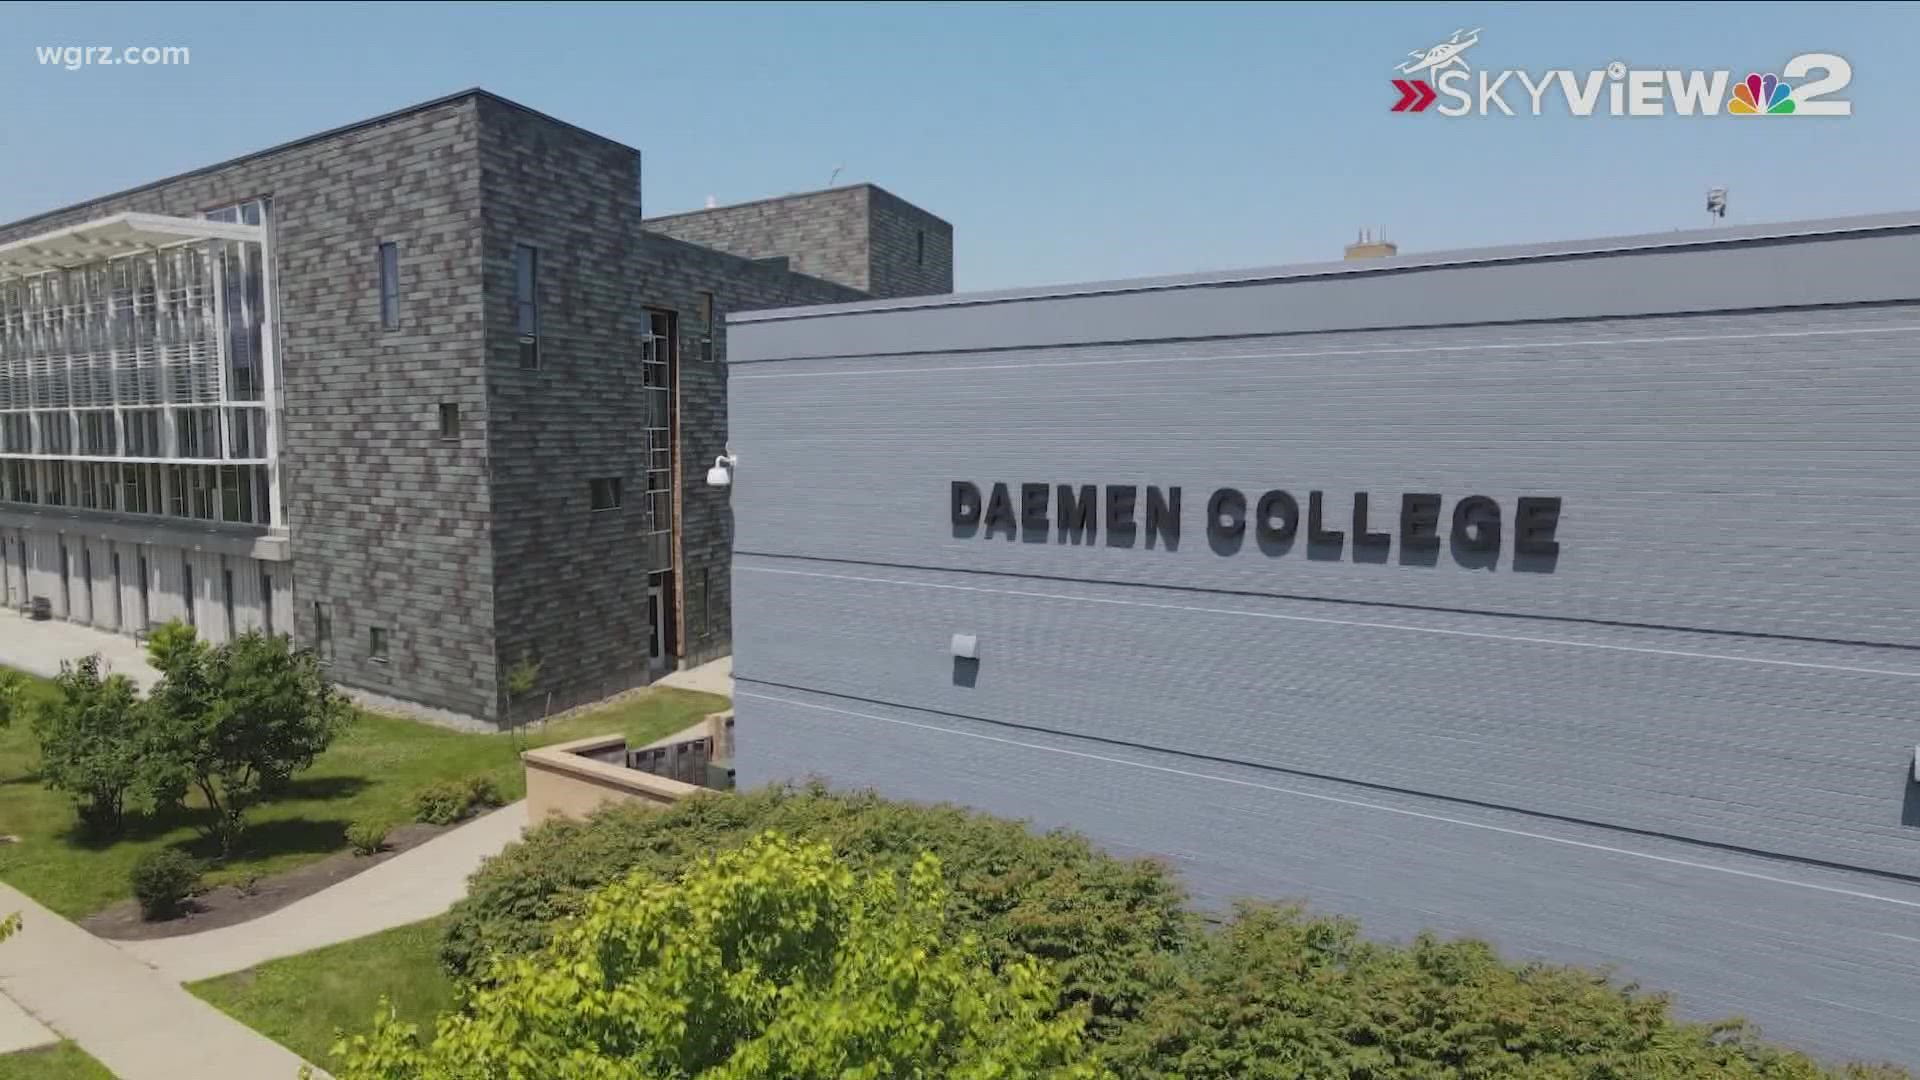 Daemen College gets approval to be now called Daemen University